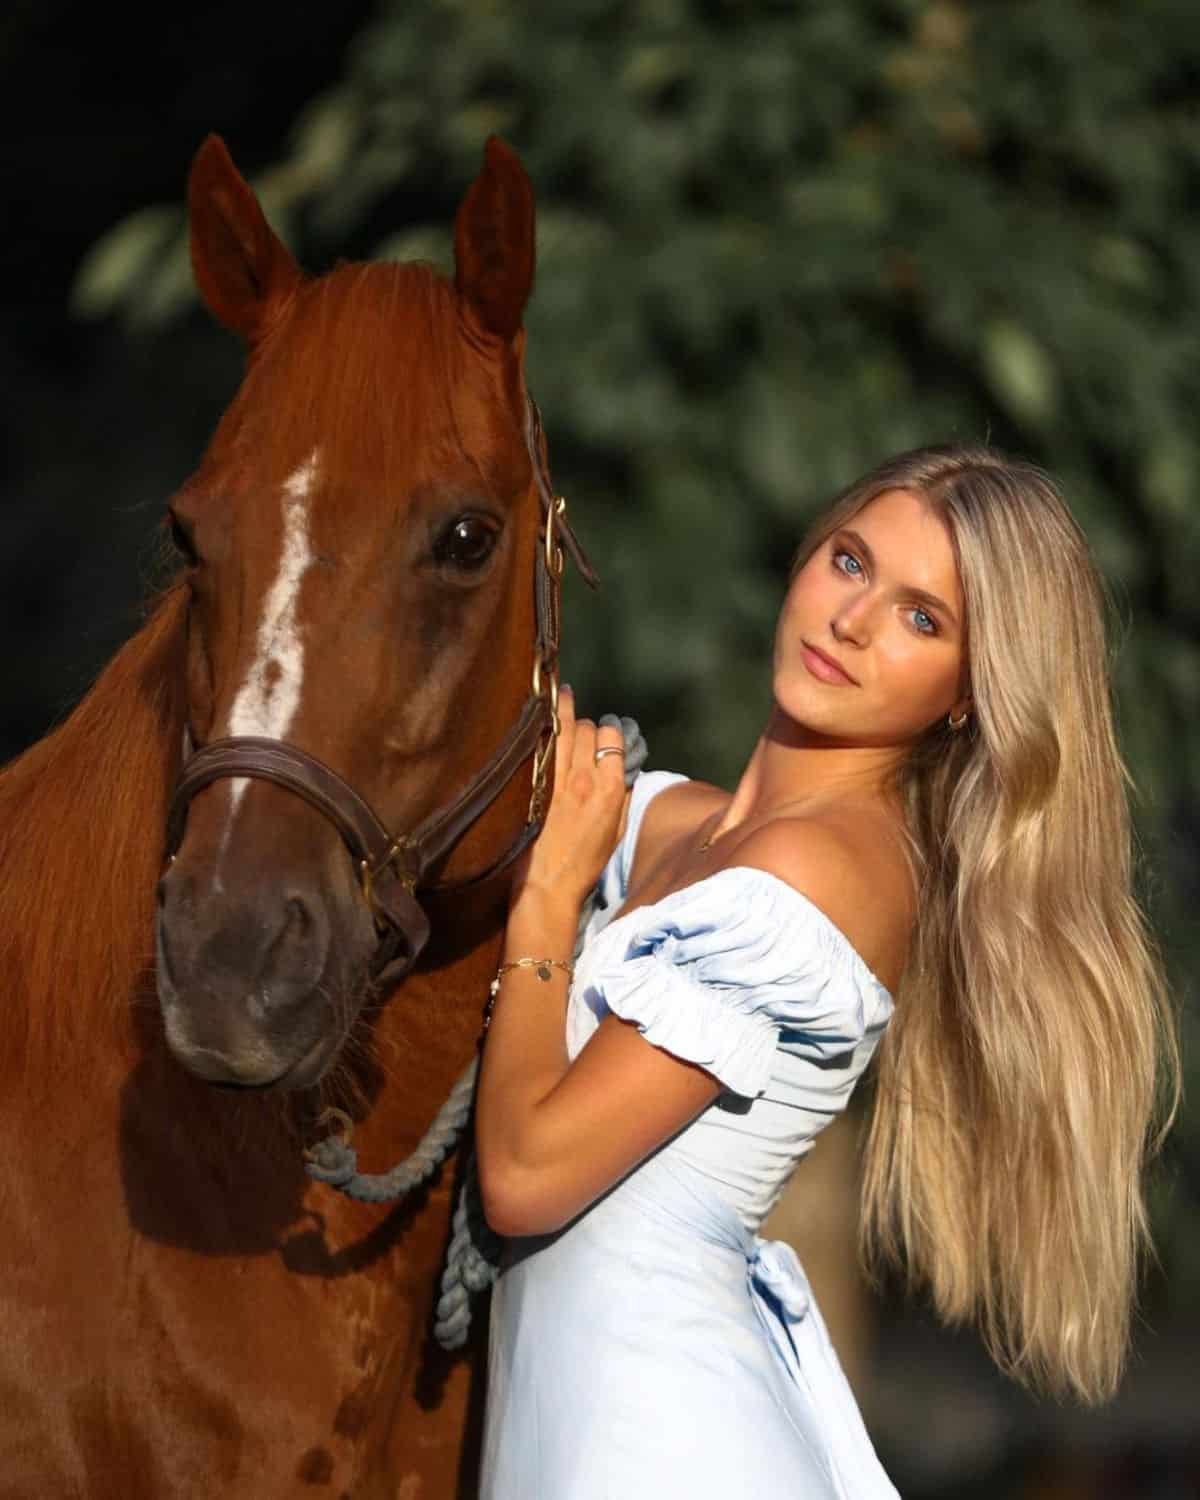 A young woman stands near a brown horse.